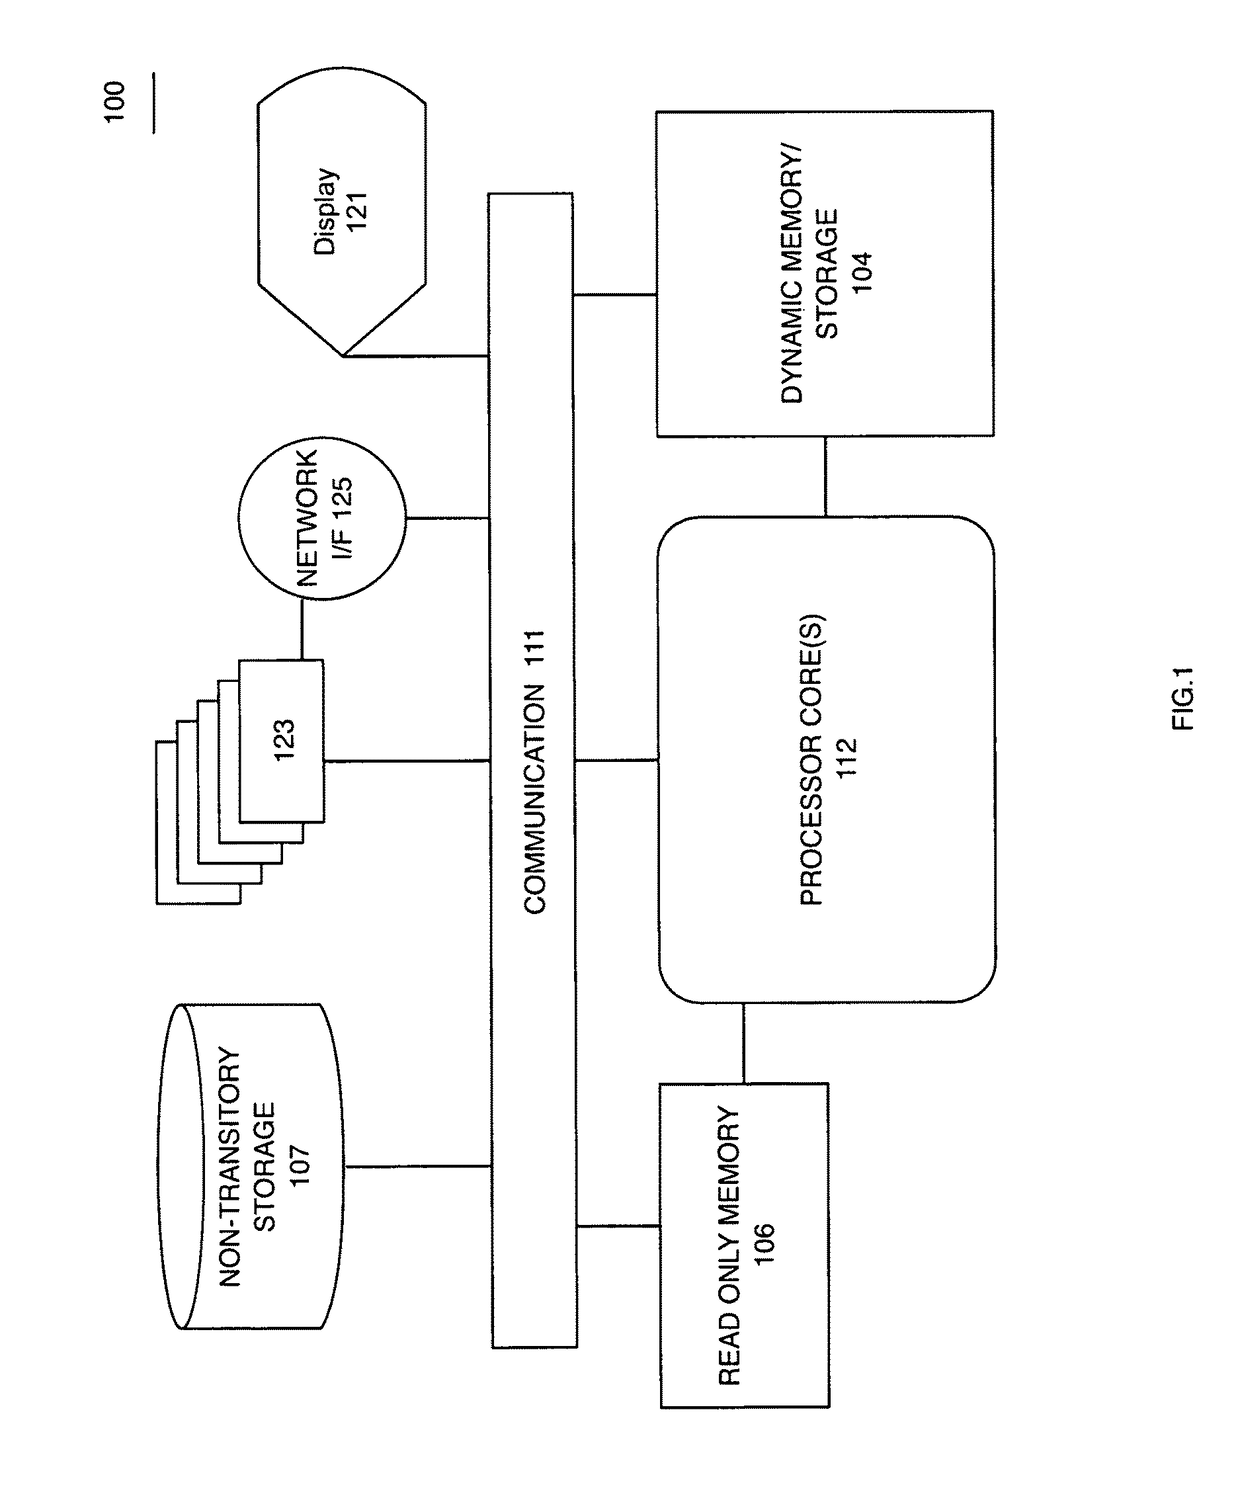 Pattern analytics and physical access control system method of operation